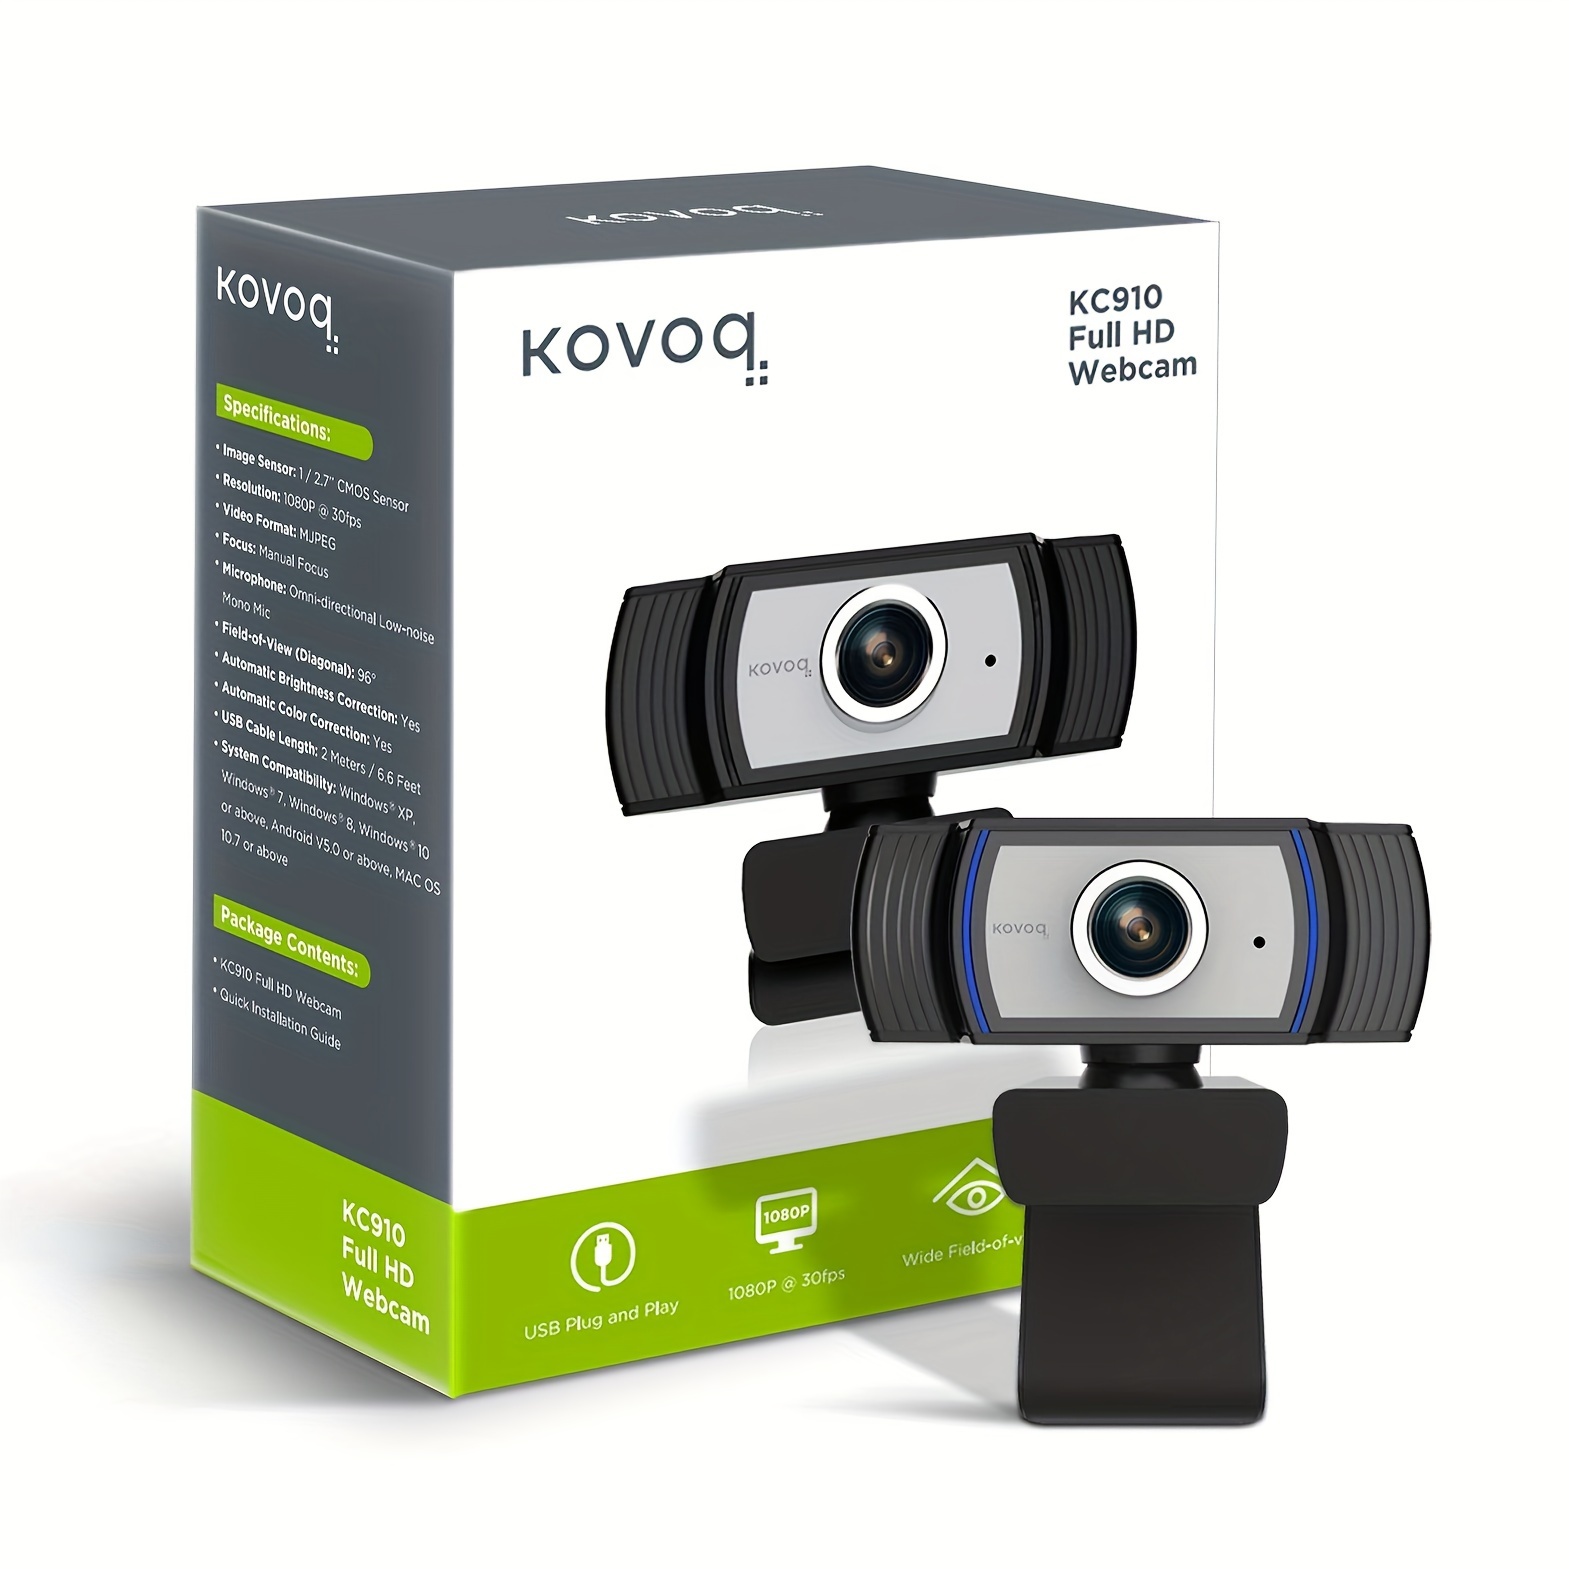 

Kovoq Hd 1080p Streaming Webcam With Microphone And Auto Color/light Correction, 96° Wide Angle Usb Web Camera, Plug And Play, For Video Conferencing And Gaming, /zoom/skype, Laptop Desktop